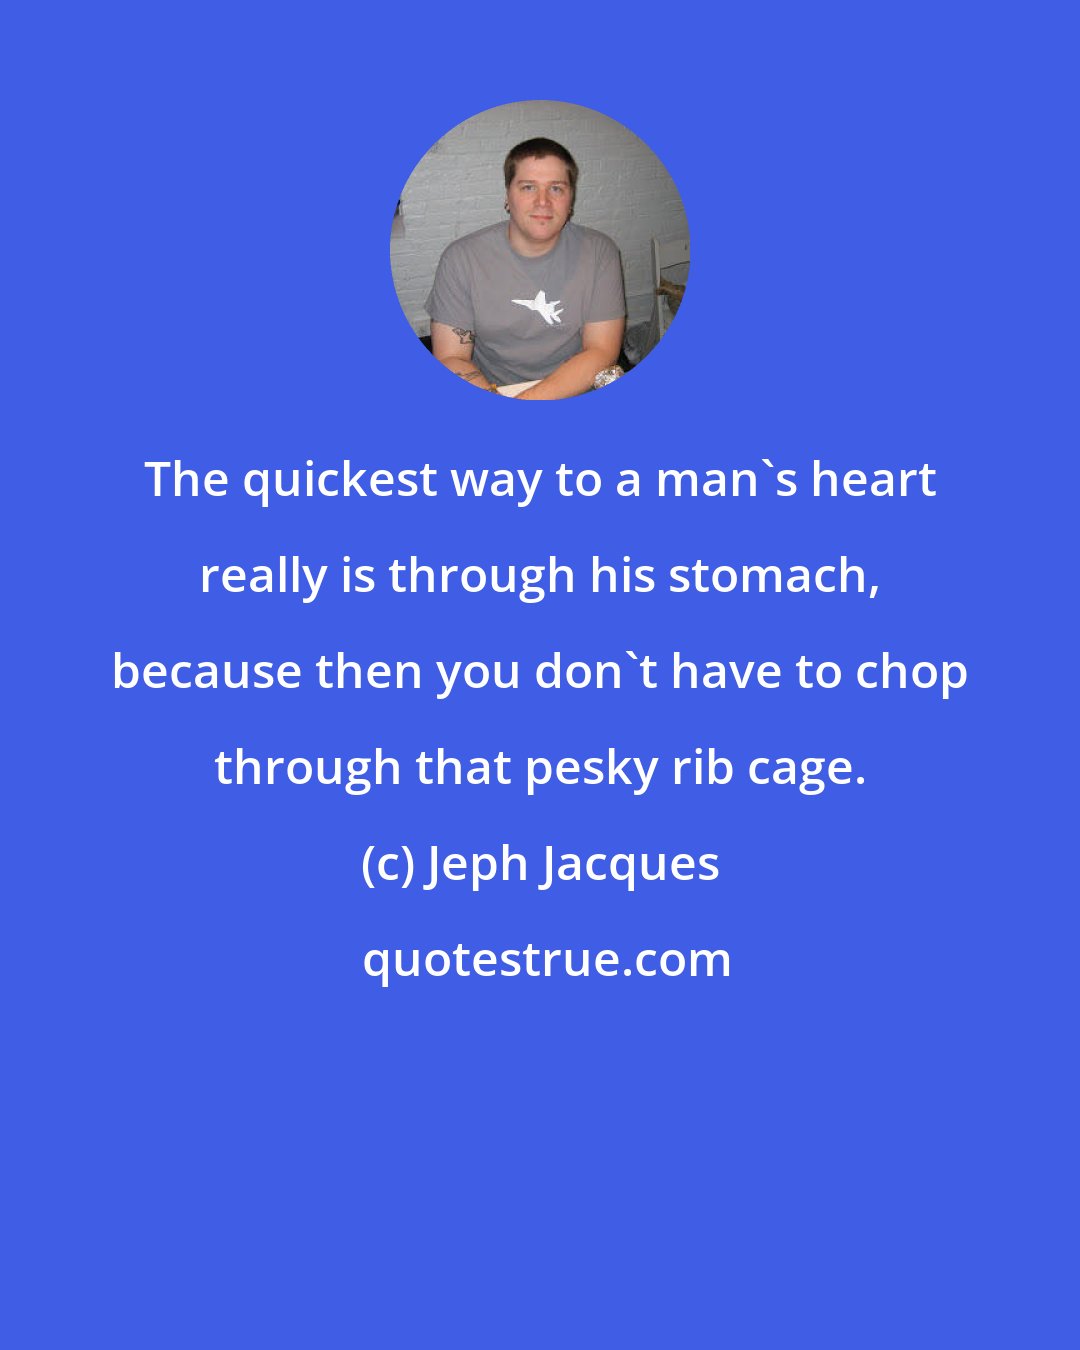 Jeph Jacques: The quickest way to a man's heart really is through his stomach, because then you don't have to chop through that pesky rib cage.